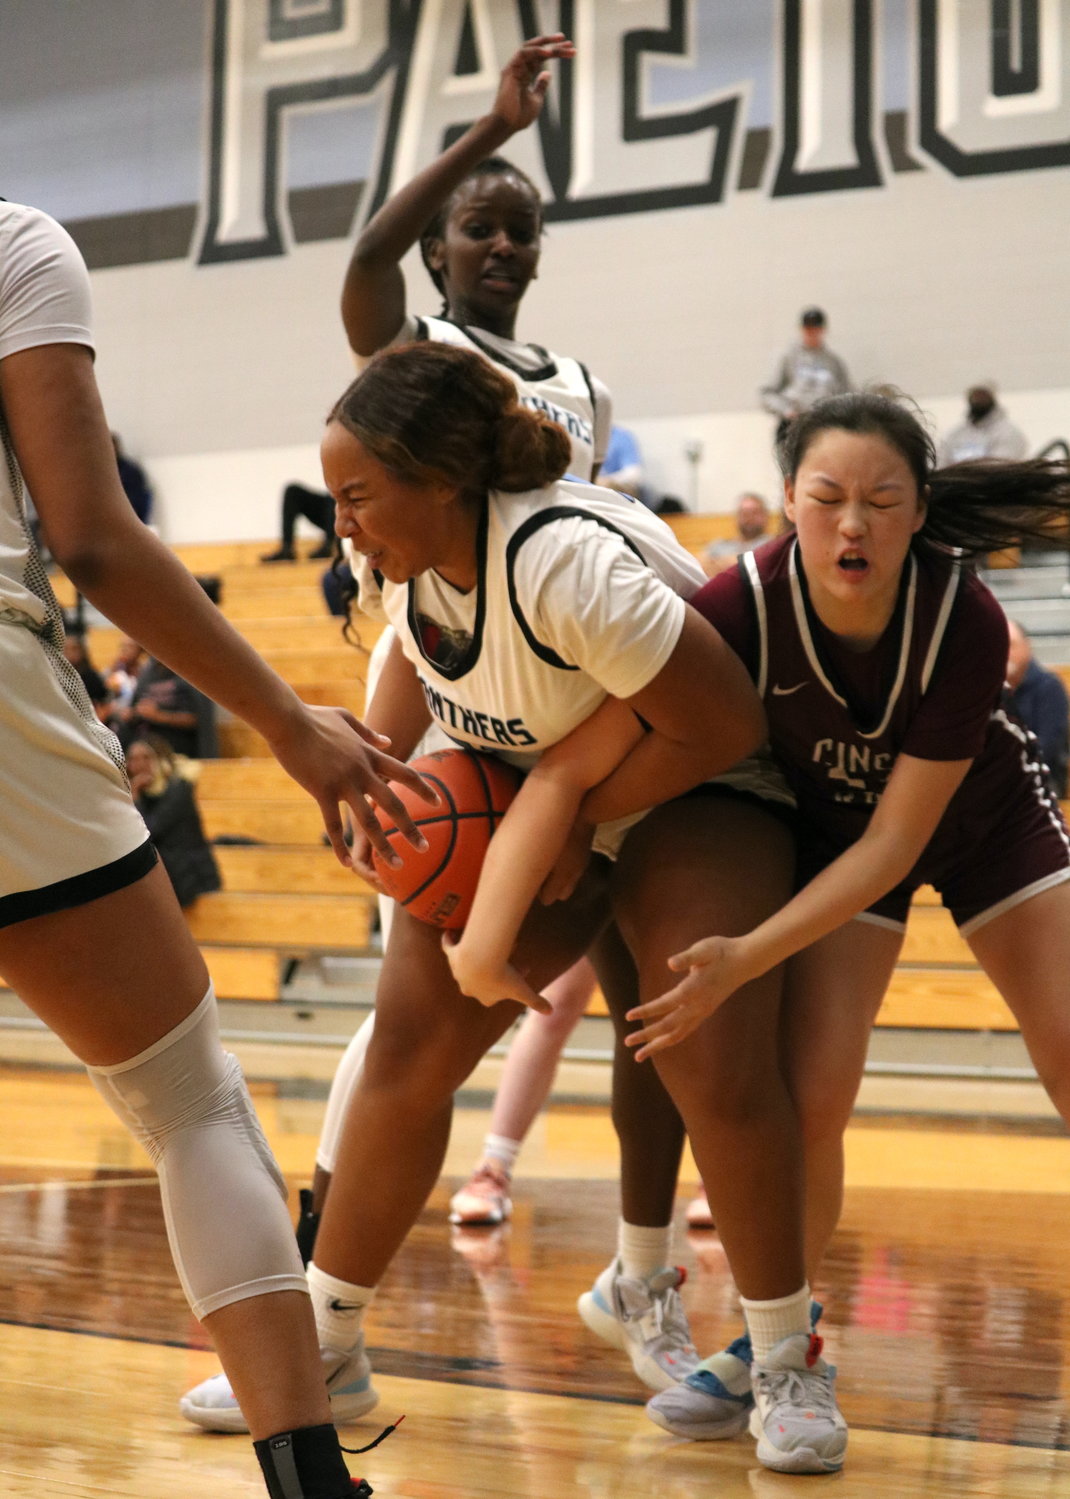 Jaleesa Kua pulls down a rebound during Friday's game between Cinco Ranch and Paetow at the Paetow gym.